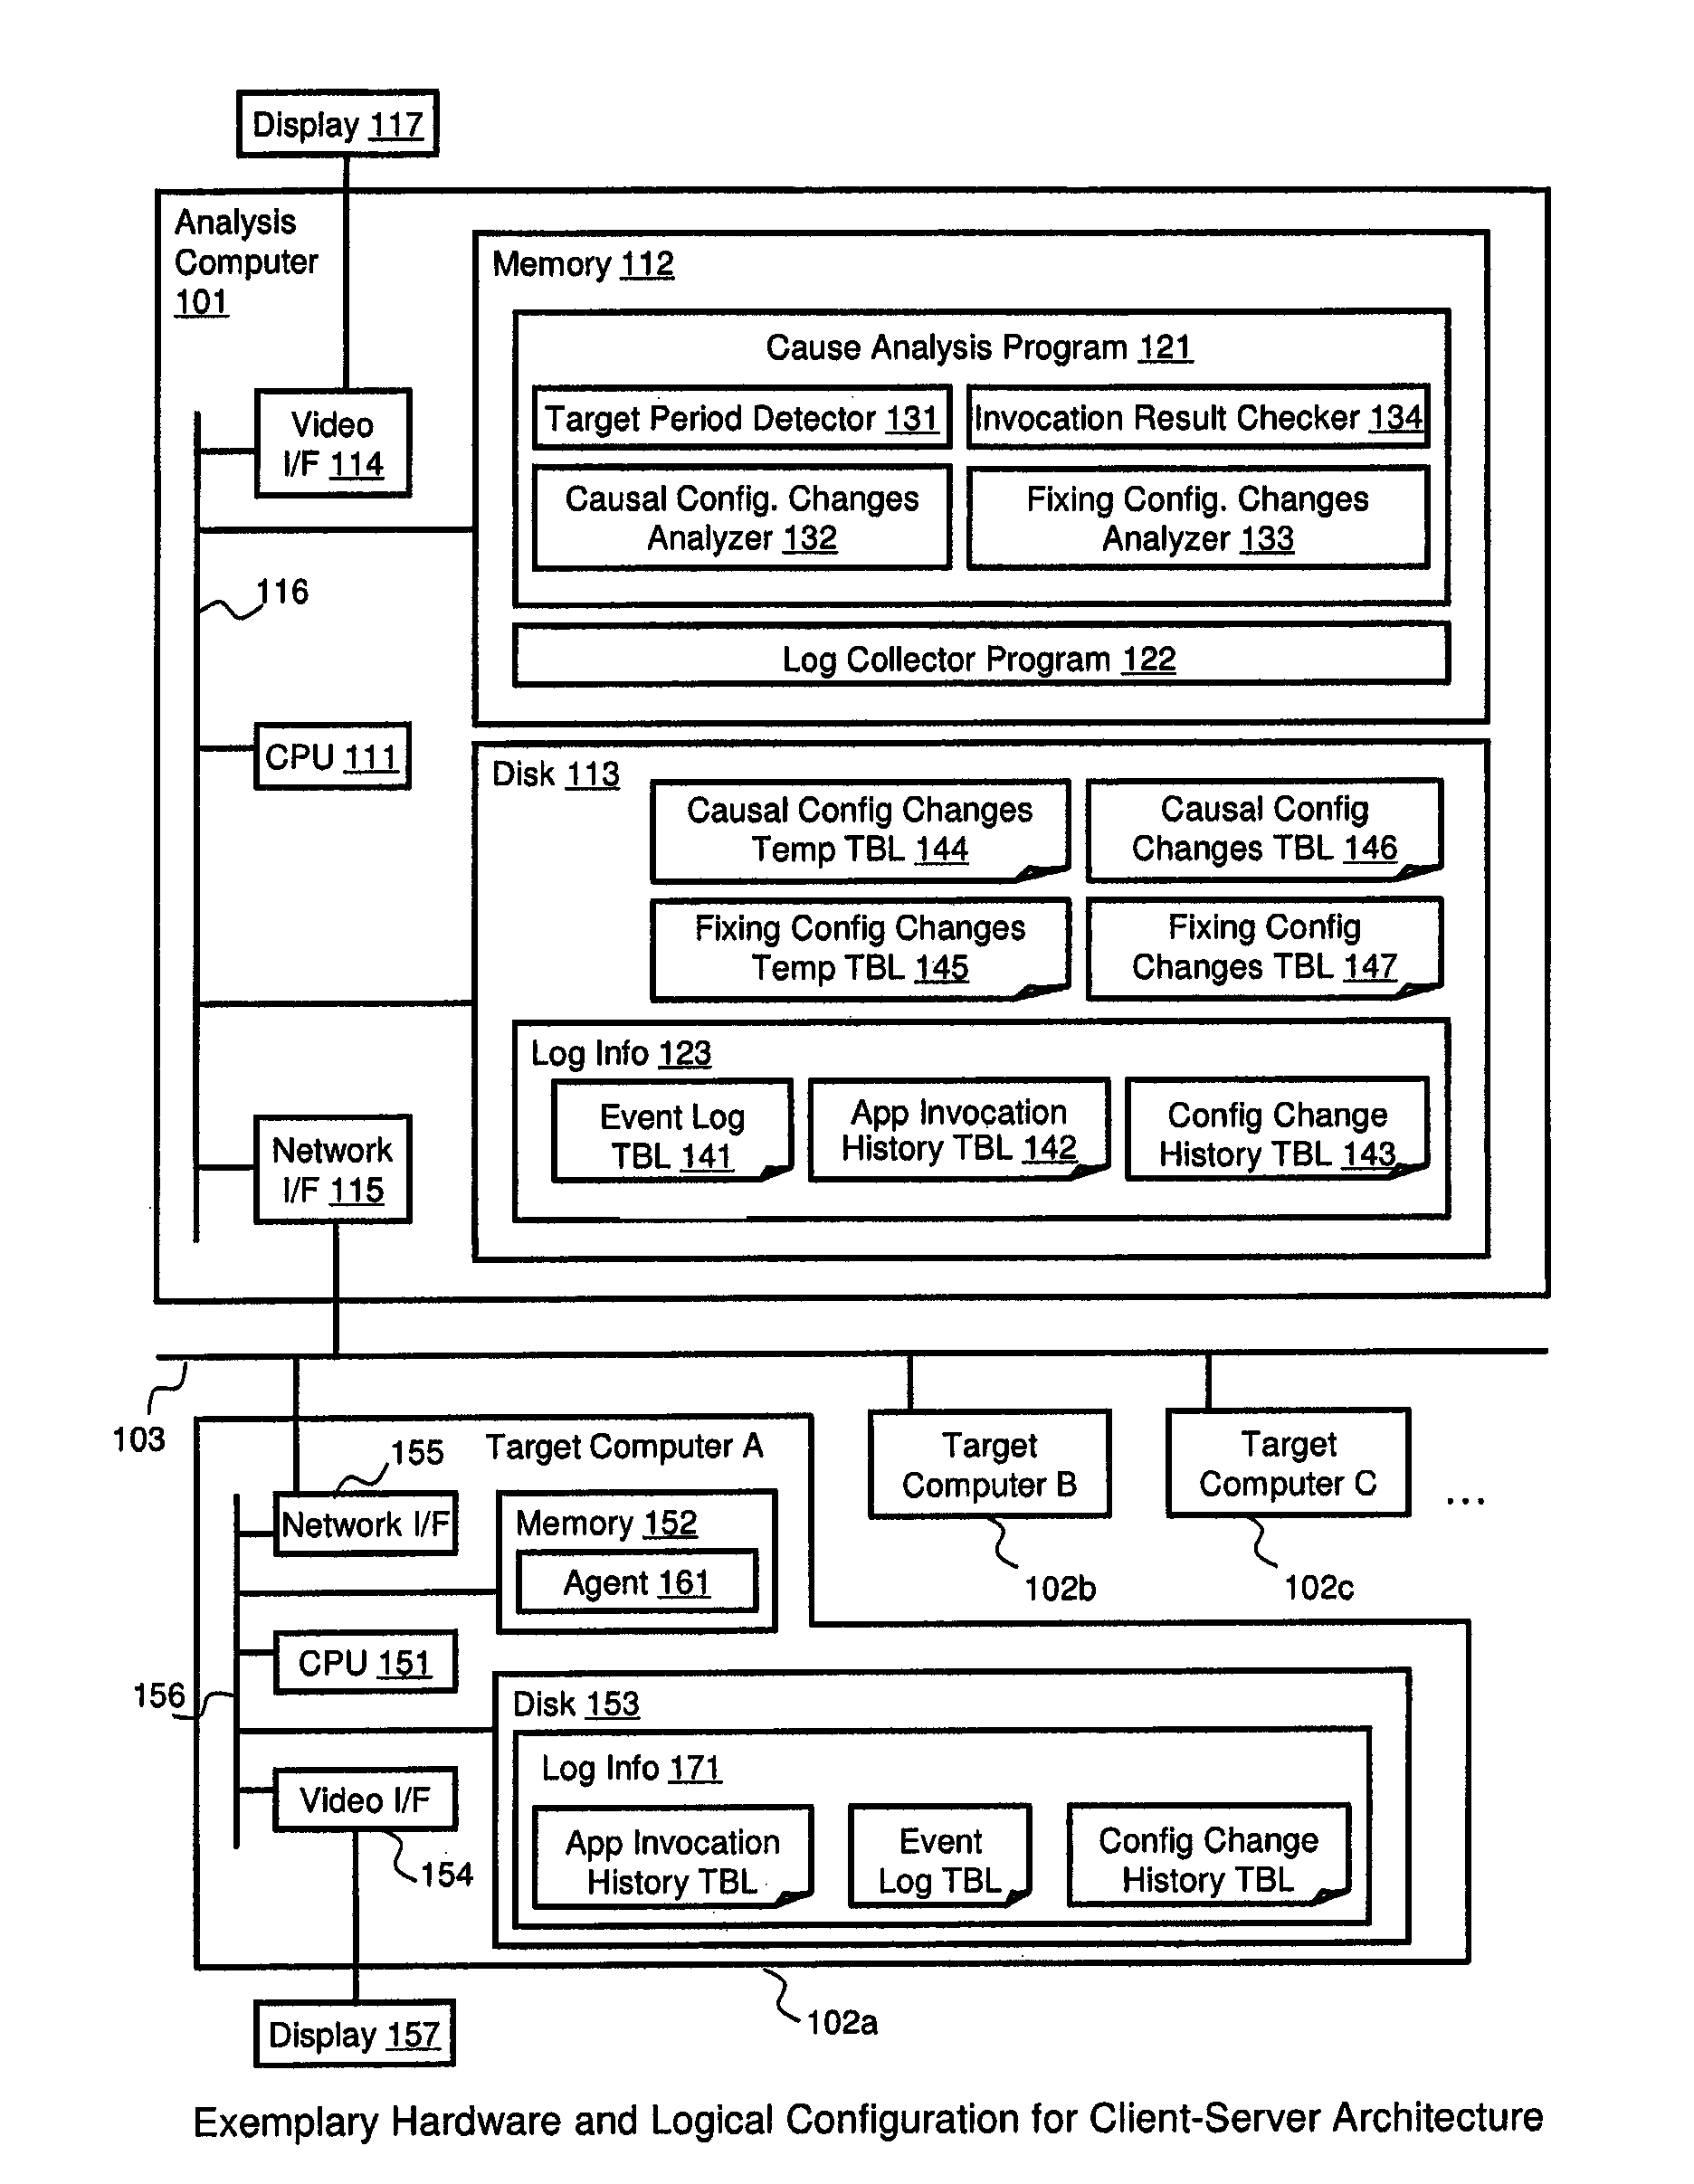 Method and apparatus for cause analysis involving configuration changes